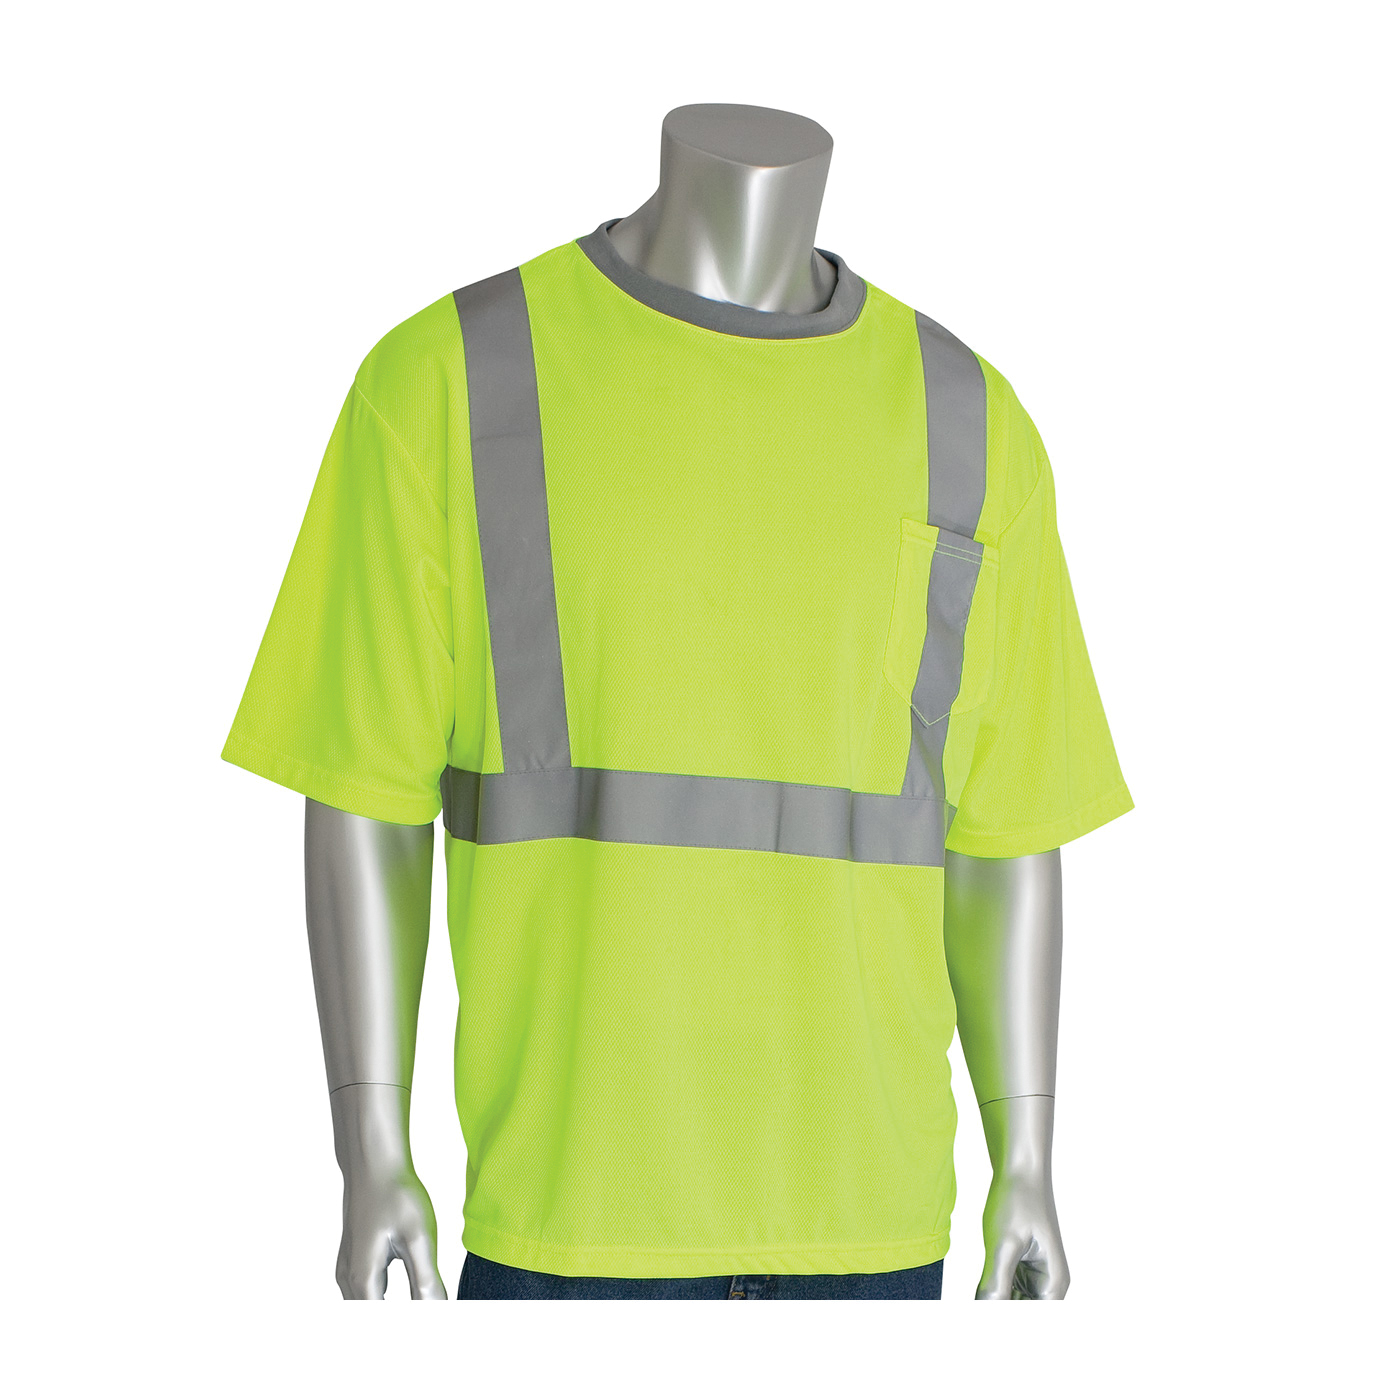 PIP® 312-1200-LY/L Short Sleeve Crew Neck T-Shirt With Reflective, L, Hi-Viz Lime Yellow, Bird's Eye Polyester, 31.1 in L